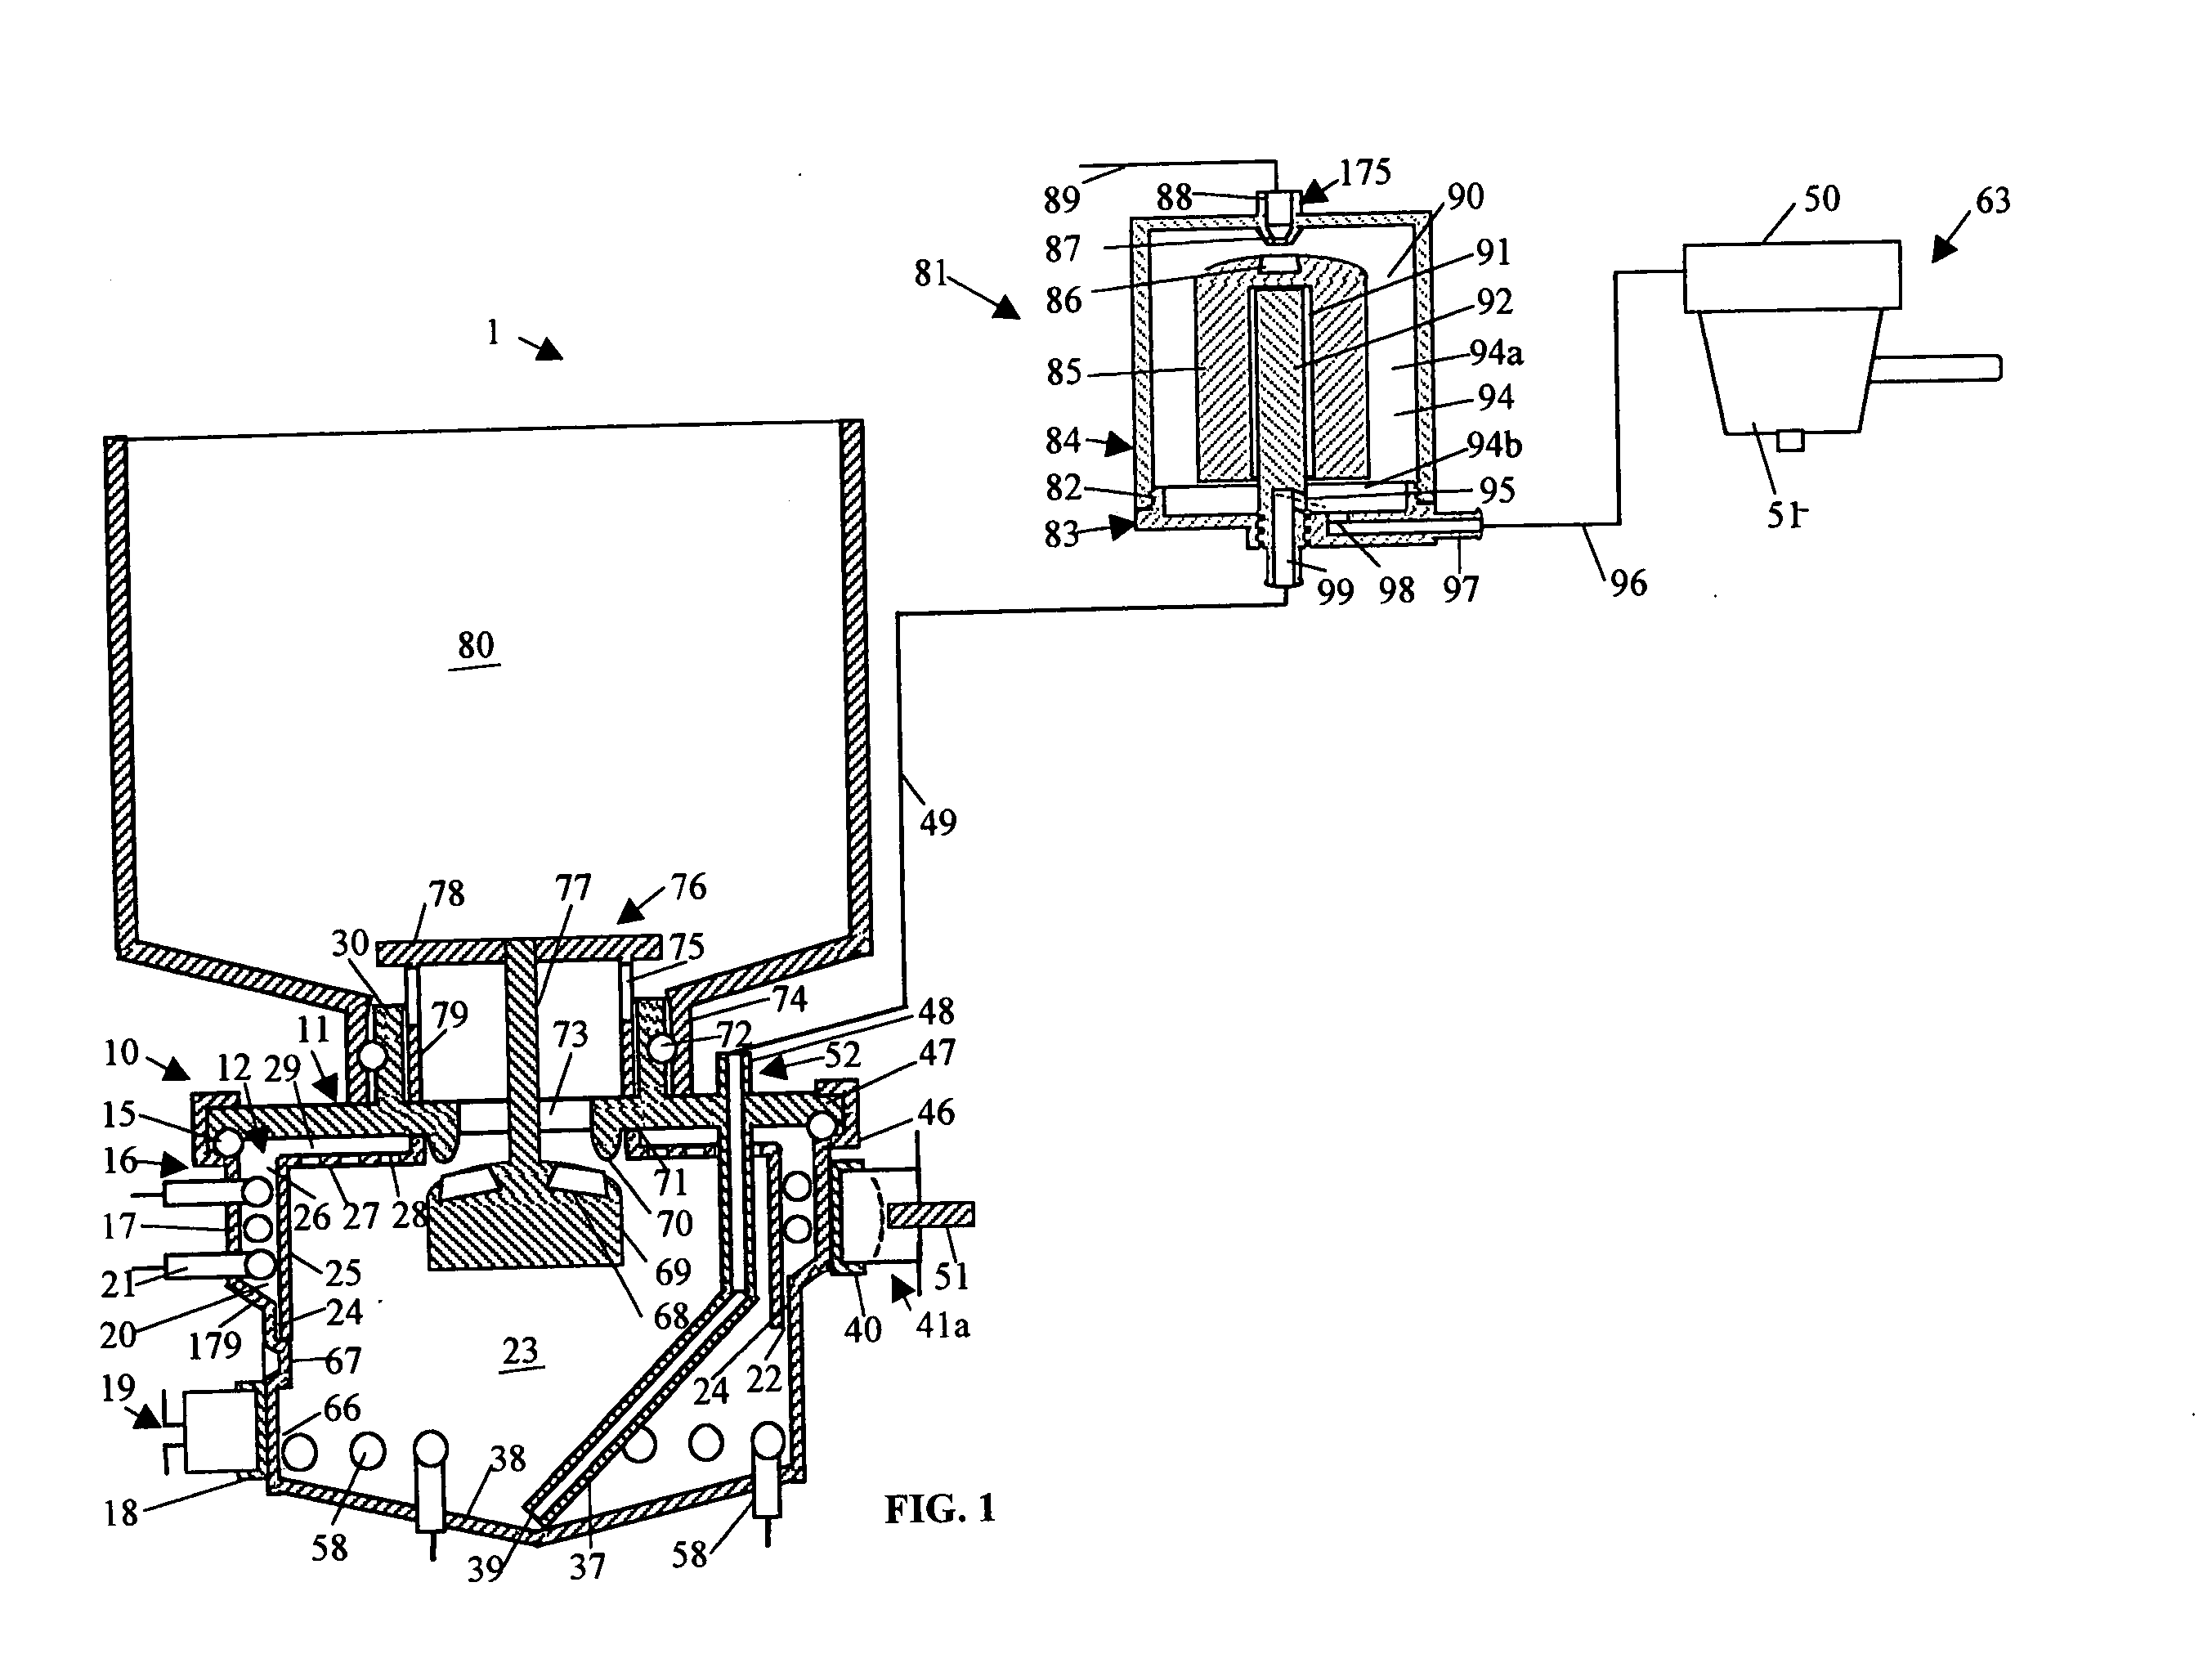 Fluid delivery system for generating pressurized hot water pulses